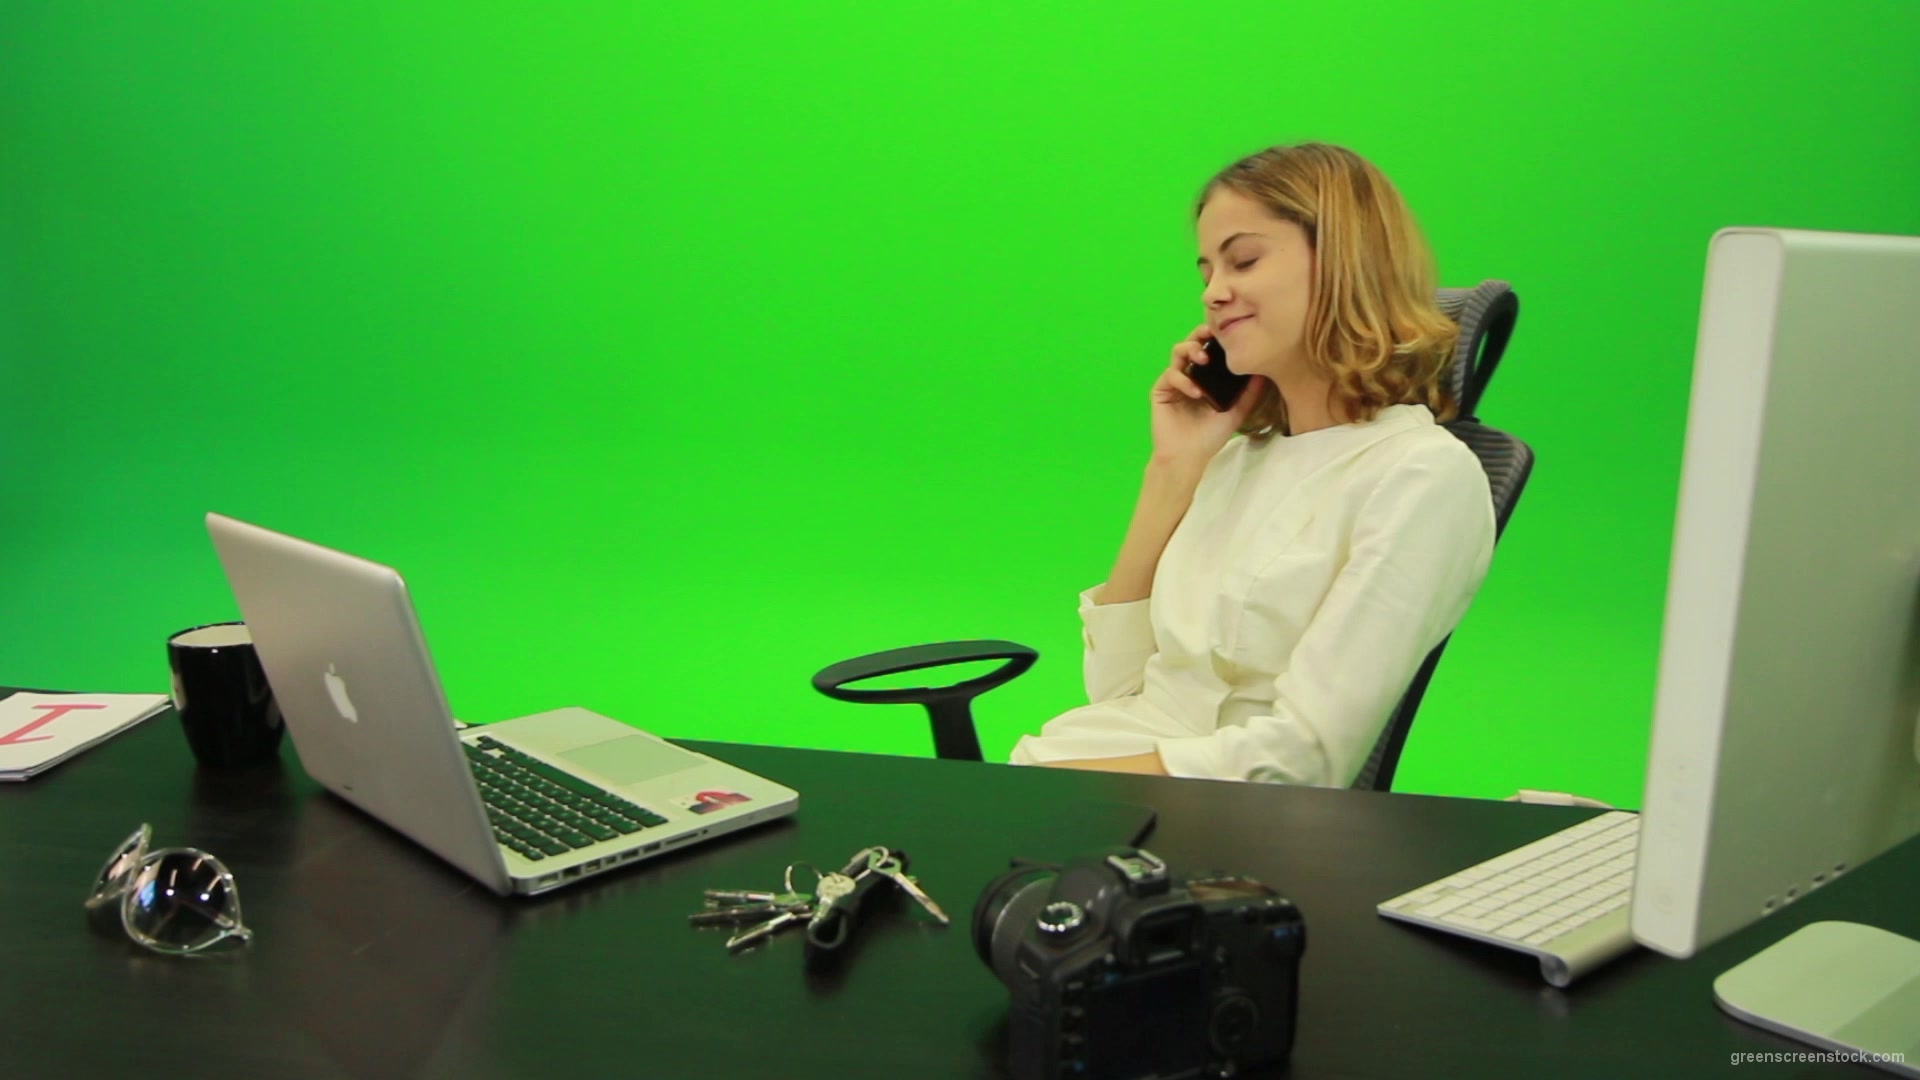 Laughing-Business-Woman-is-Talking-on-the-Phone-Green-Screen-Footage_008 Green Screen Stock